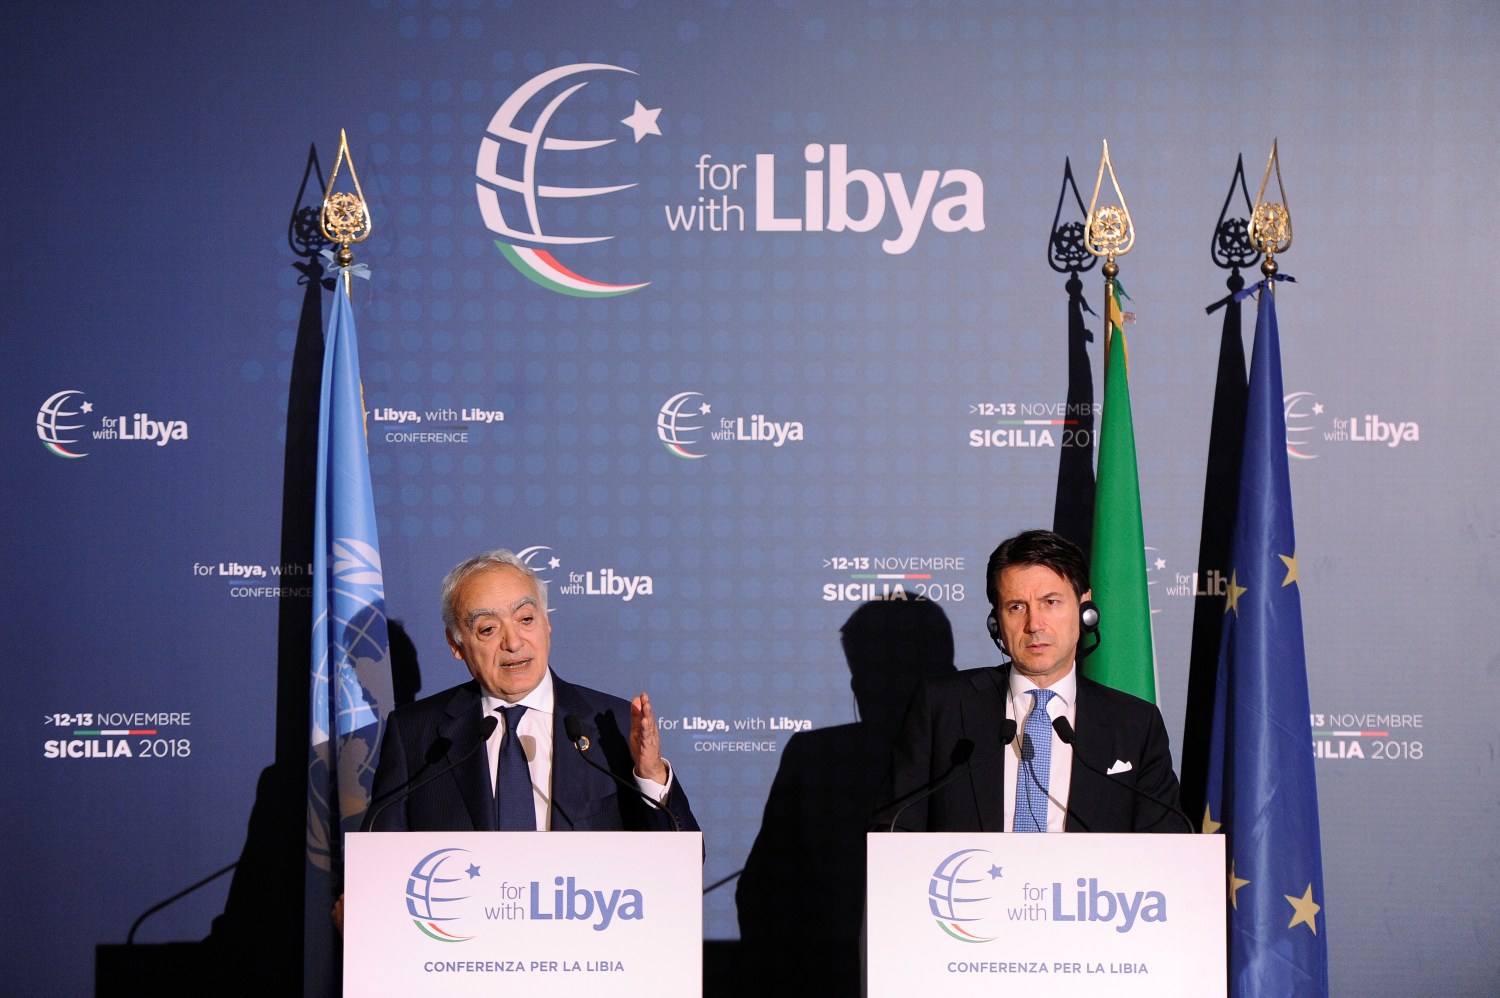 U.N. Envoy to Libya Ghassan Salame and Italy's Prime Minister Giuseppe Conte attend a news conference after the second day of the international conference on Libya in Palermo, Italy November 13, 2018. REUTERS/Guglielmo Mangiapane - RC124FDB7760